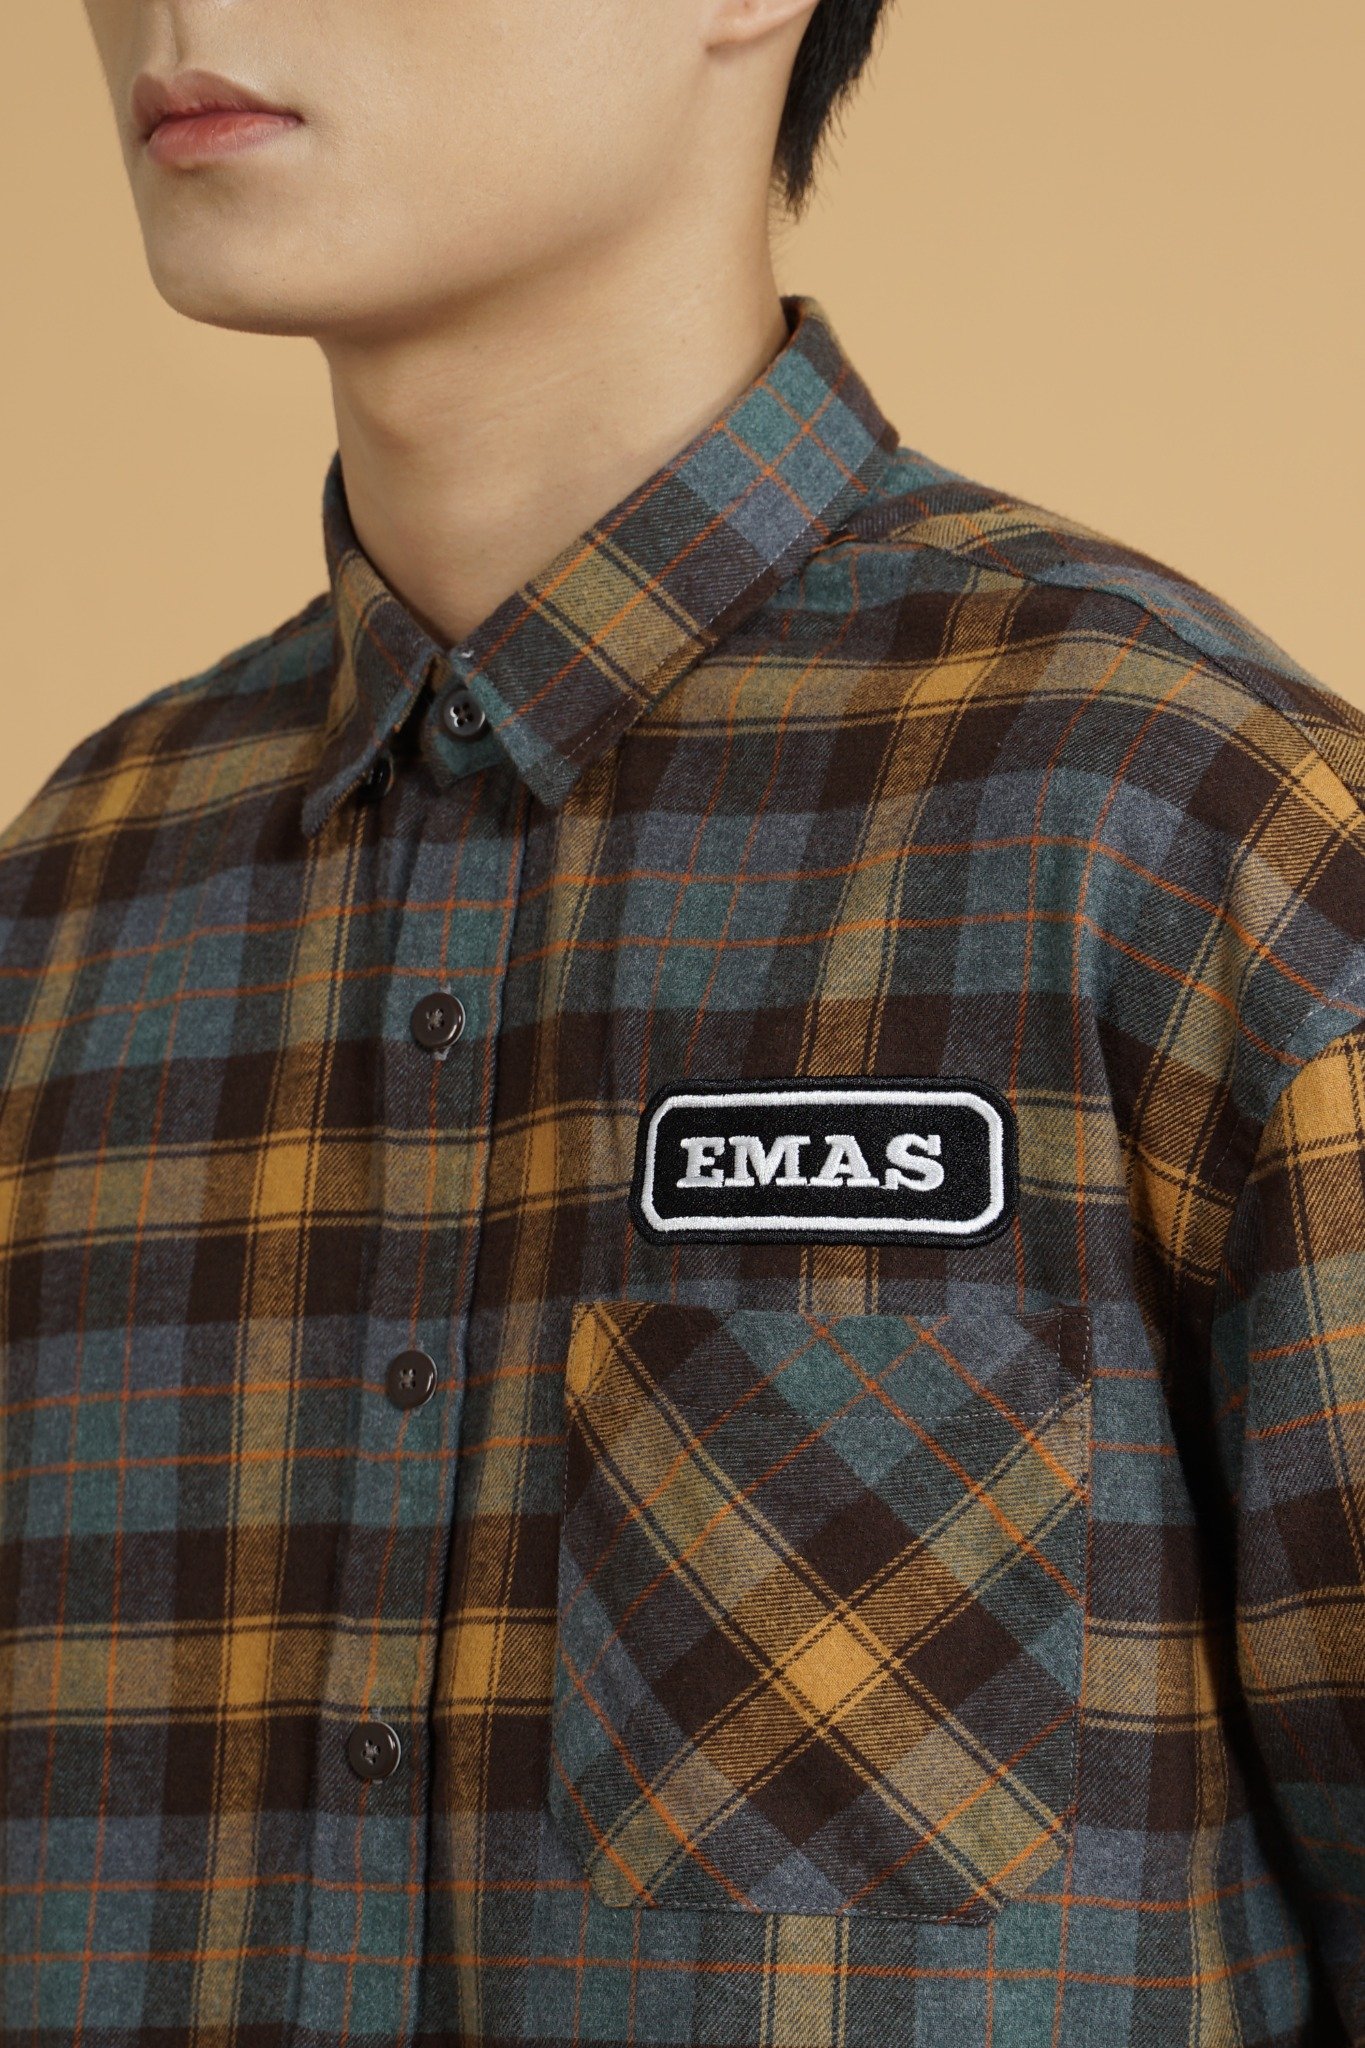  TEAL YELLOW LOGO FLANNEL 